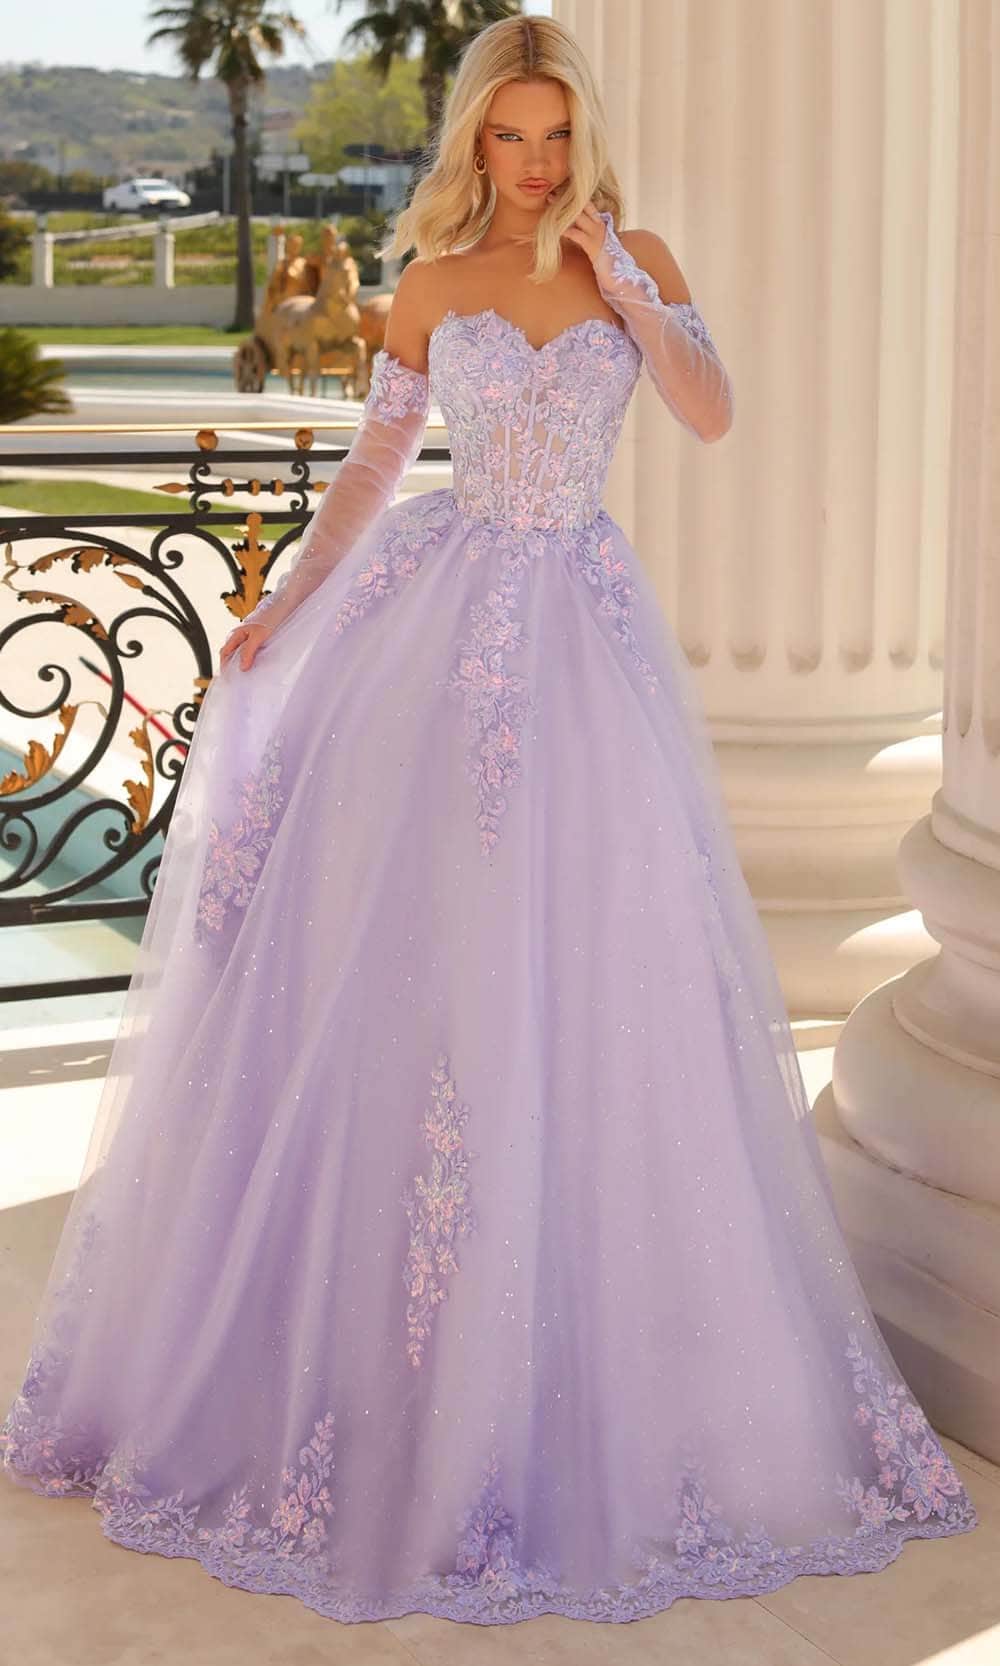 Image of Clarisse 810792 - Applique A-Line Prom Gown